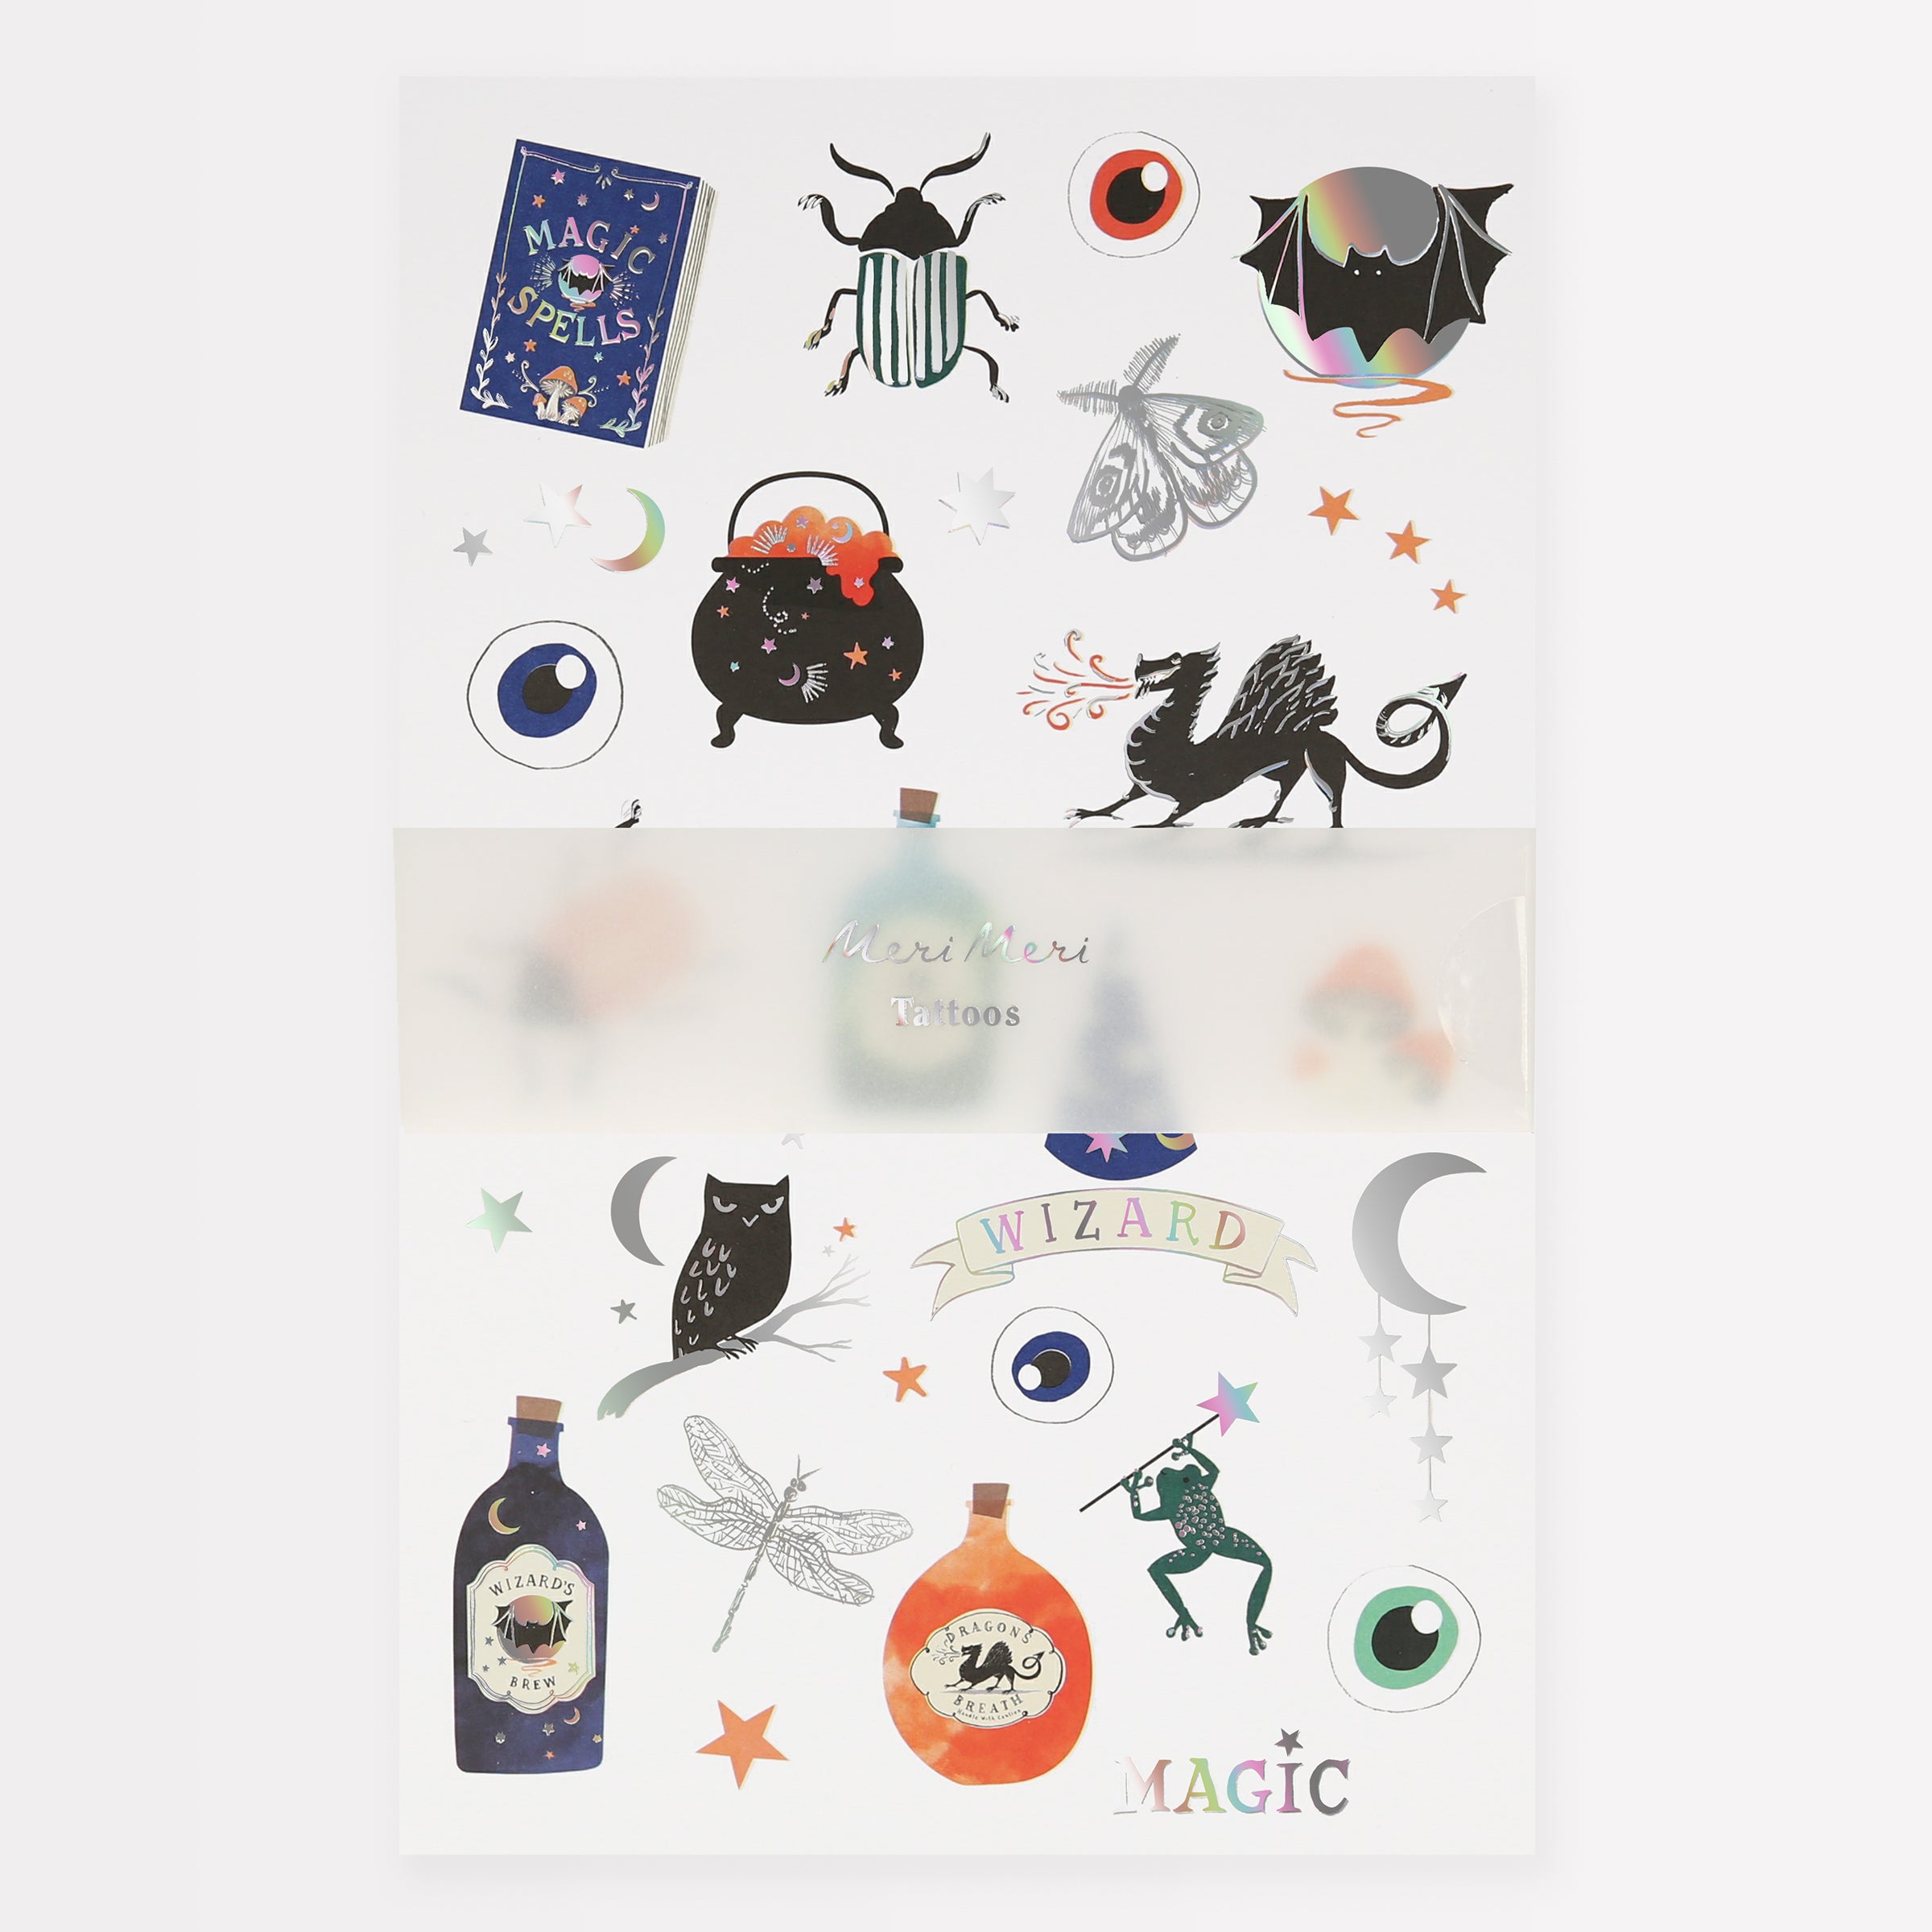 Our magic tattoos, with silver holographic foil, are ideal for a magic birthday party or Halloween activity.